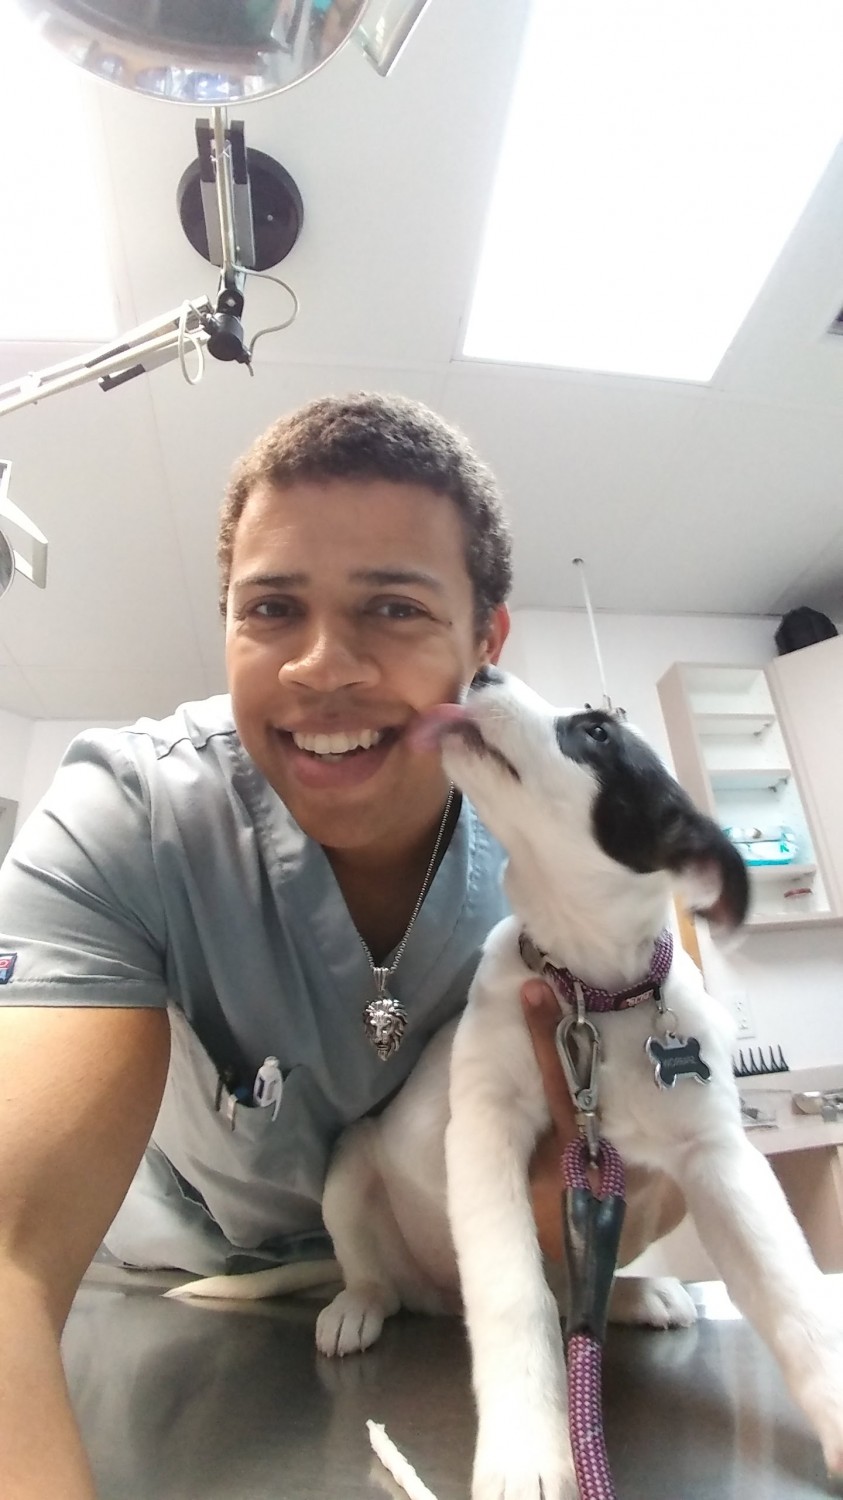 Jonathon - Veterinary Assistant being licked by dog